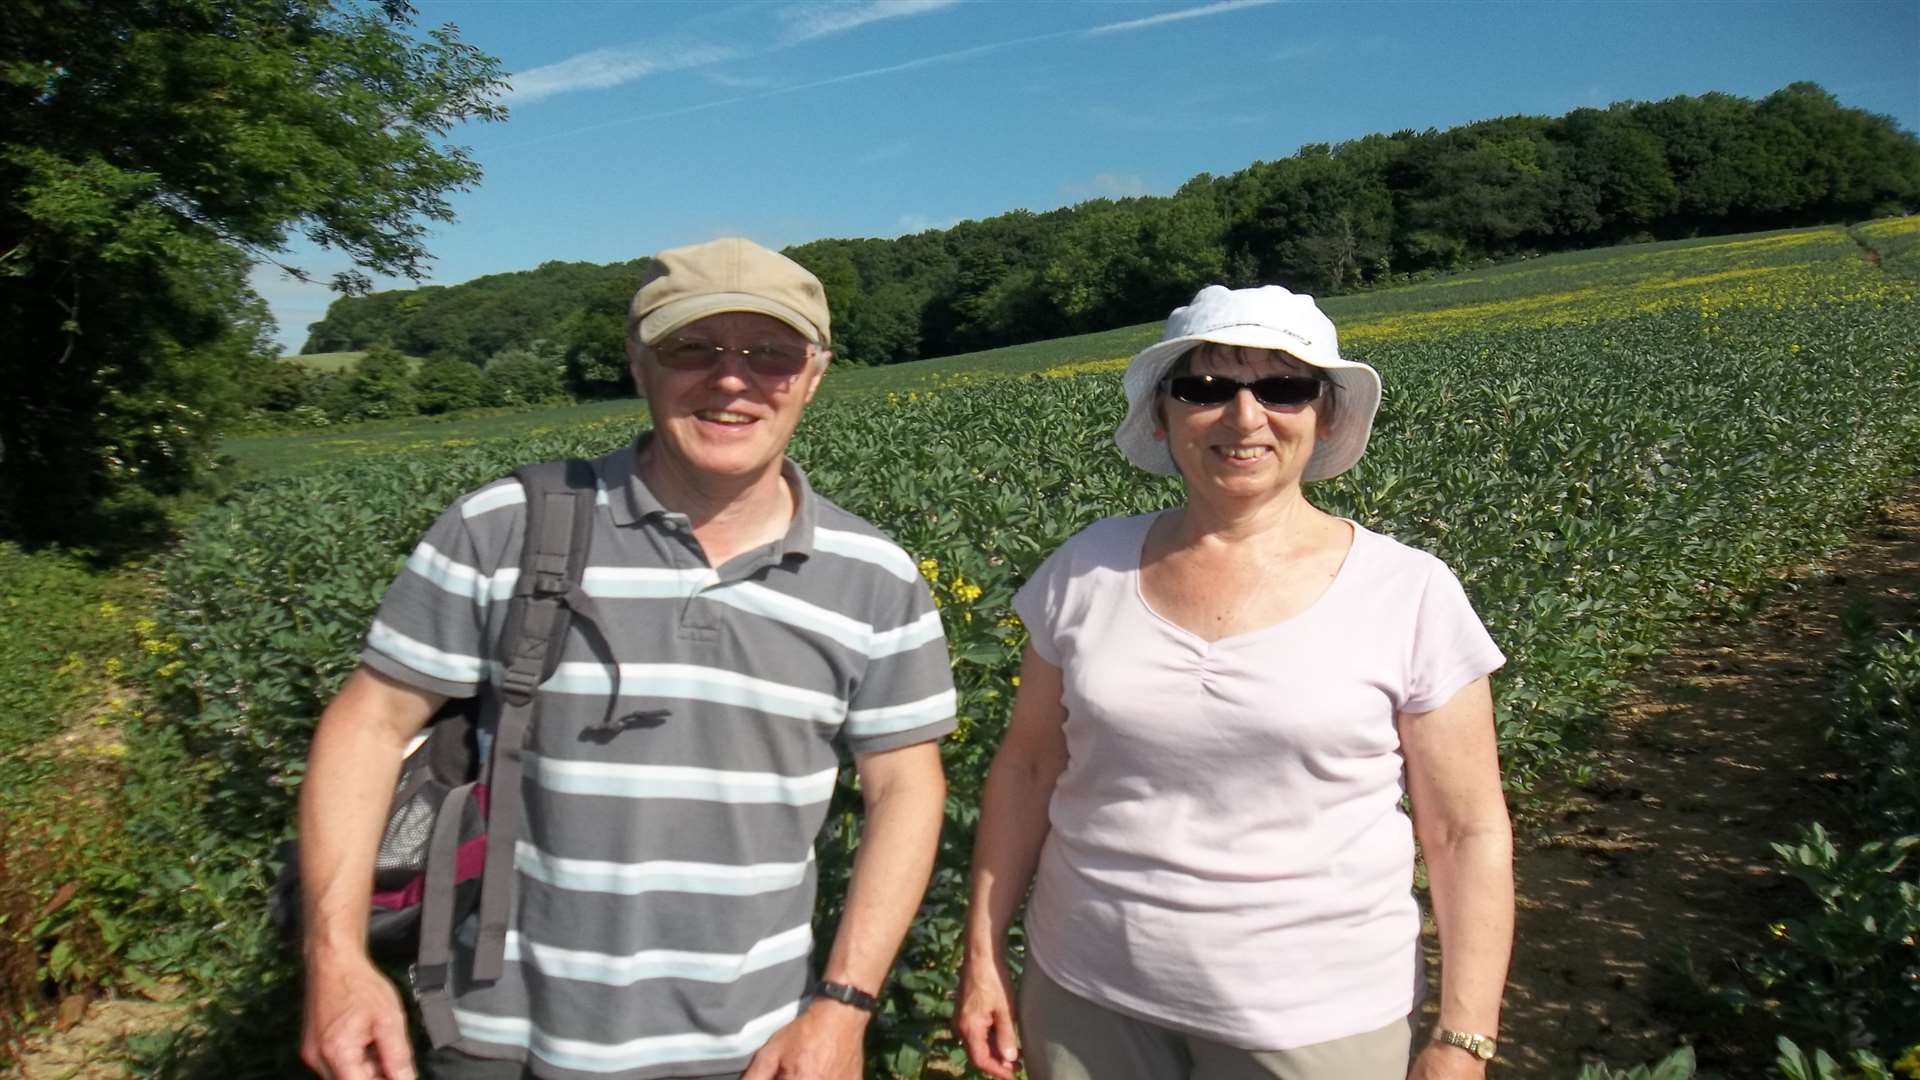 Sandra and John Dunn of Kennington, Ashford taking part in last year's KM Charity Walk. The couple are also coming to the 2014 event